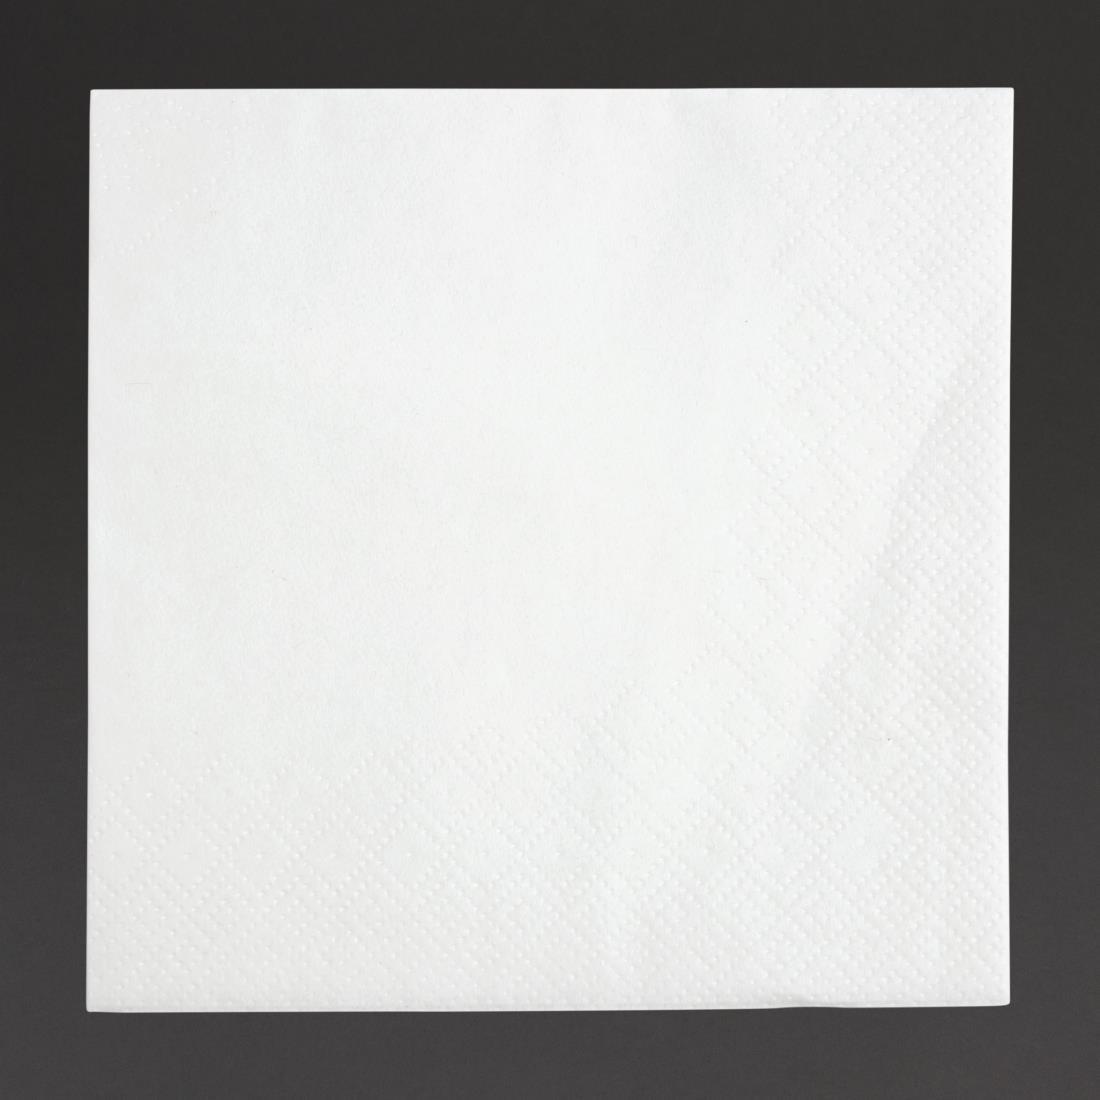 Fiesta Recyclable Cocktail Napkin White 24x24cm 2ply 1/4 Fold (Pack of 4000) - FE216  - 1